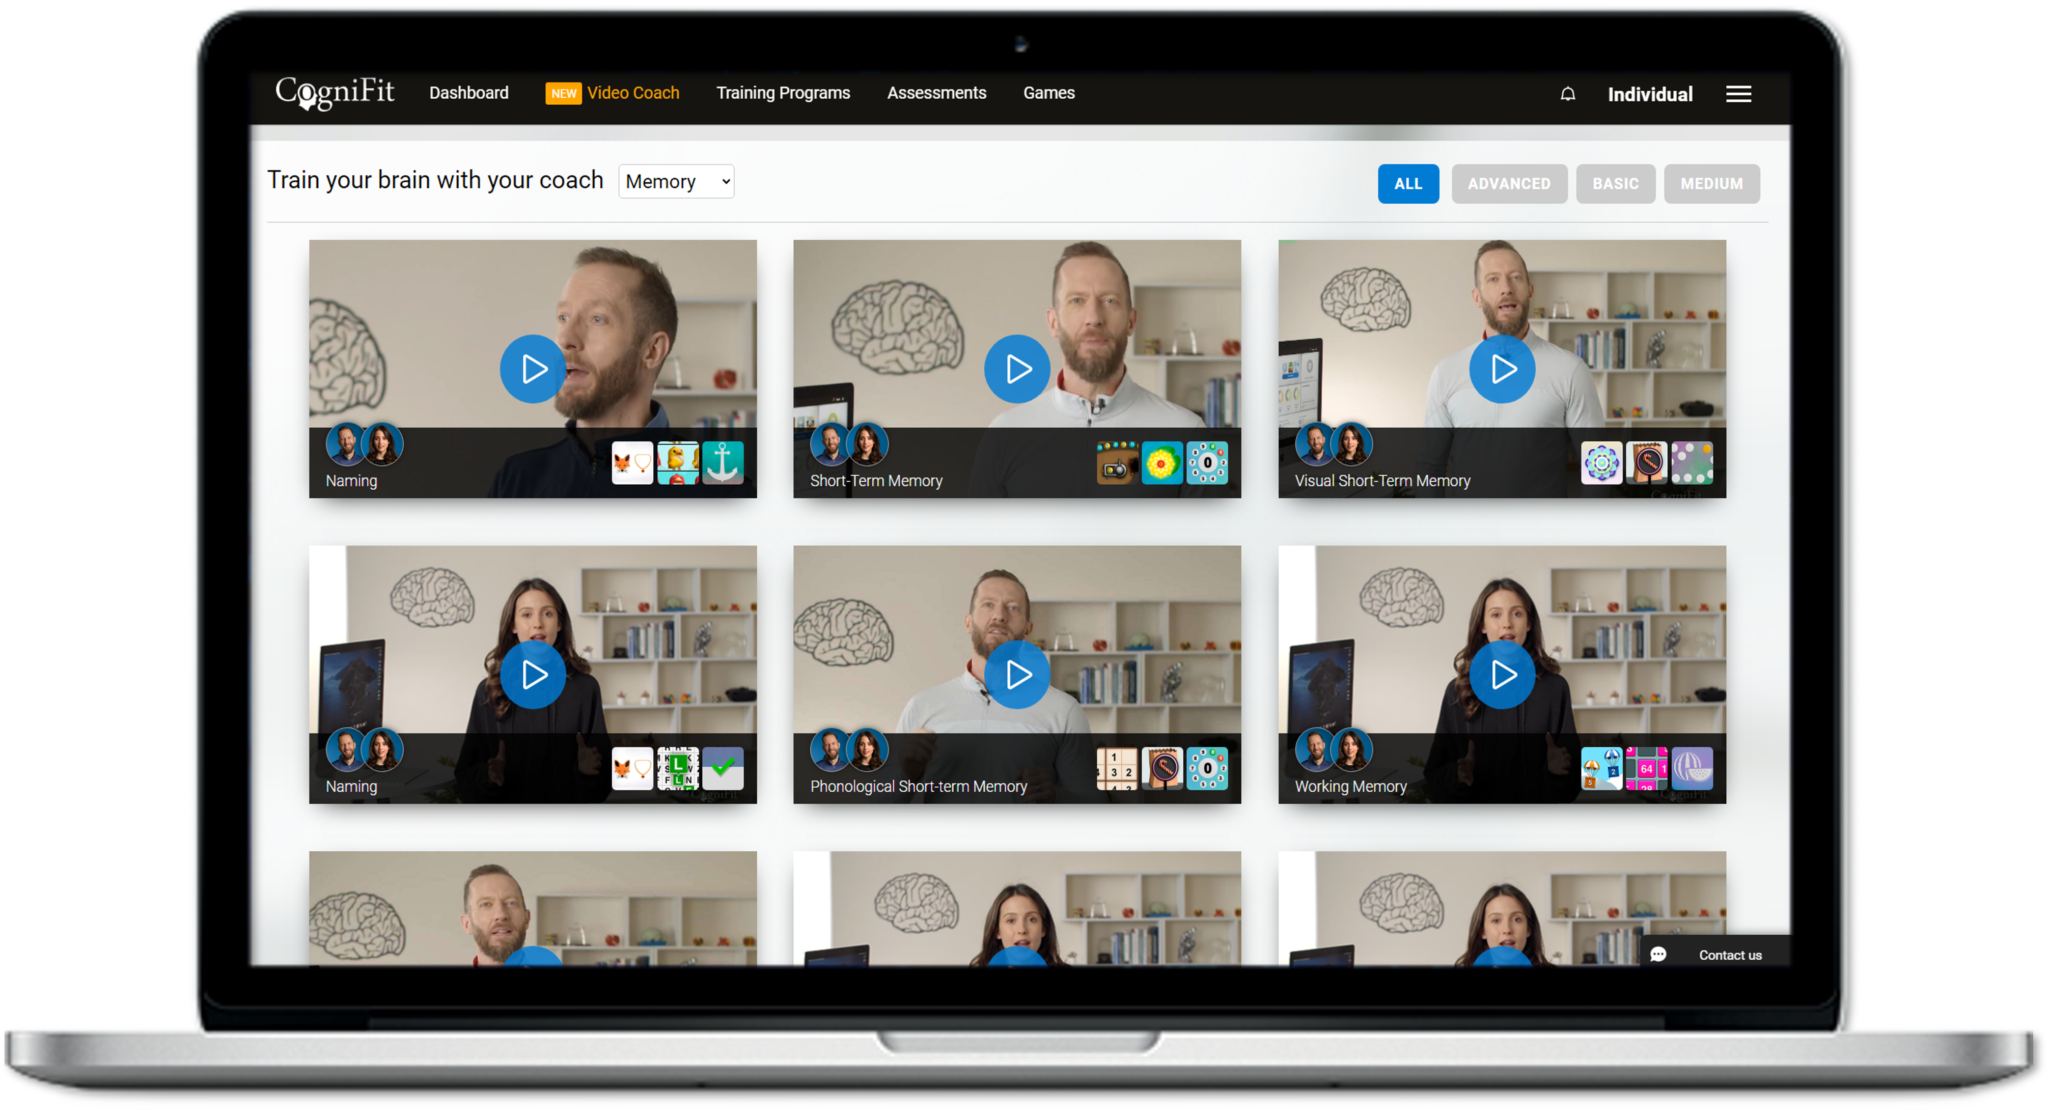 Video Coach is an exciting new training tool from CogniFit.